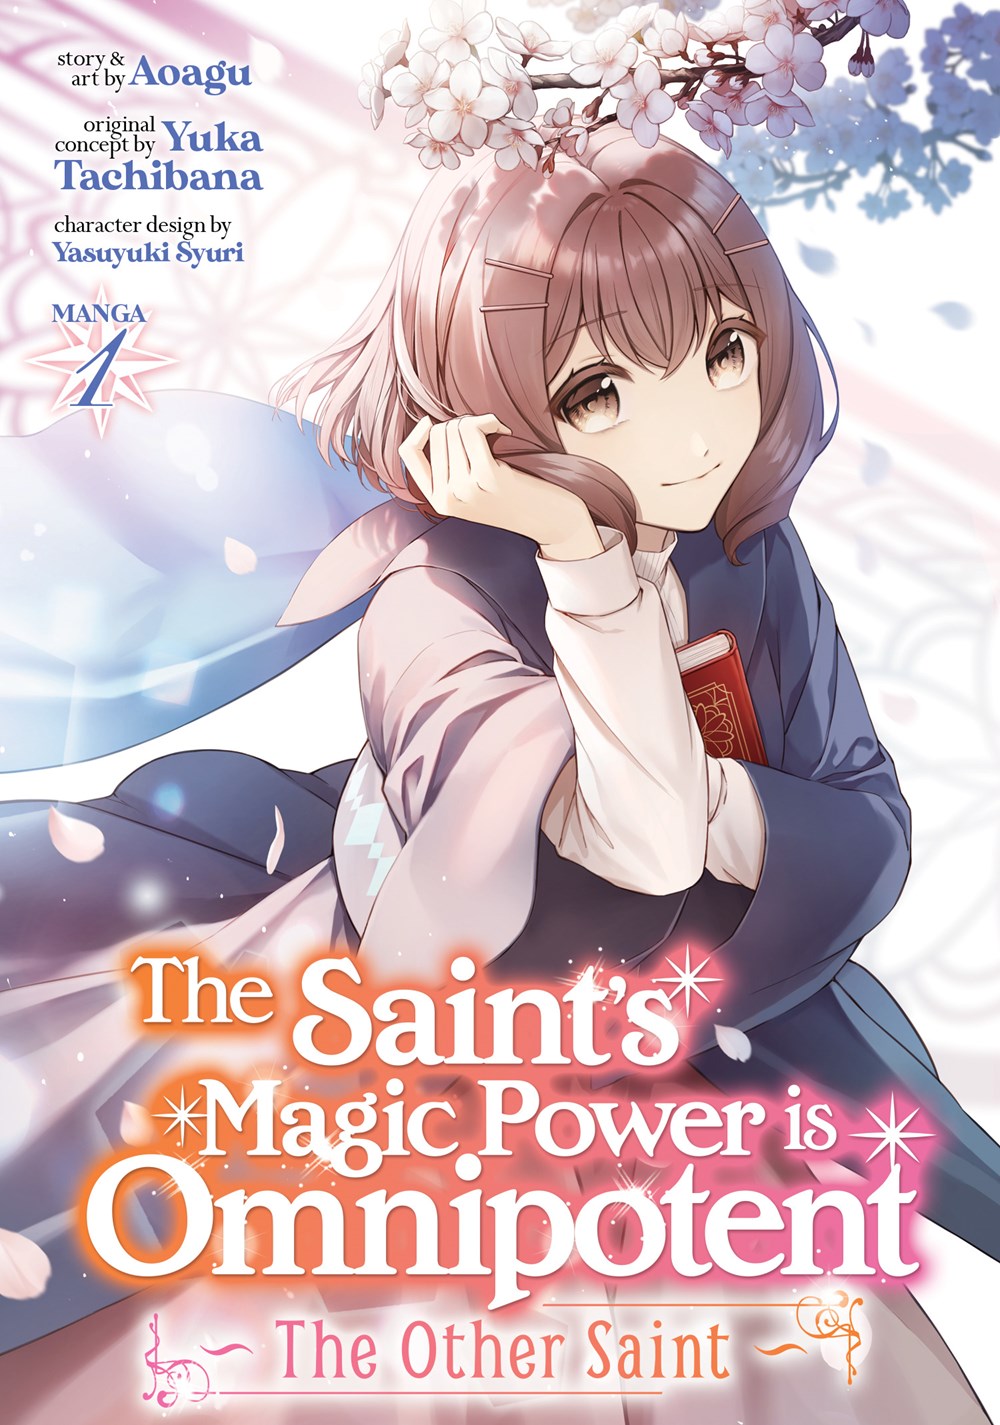 The Saint's Magic Power is Omnipotent: The Other Saint Volume 1 Review